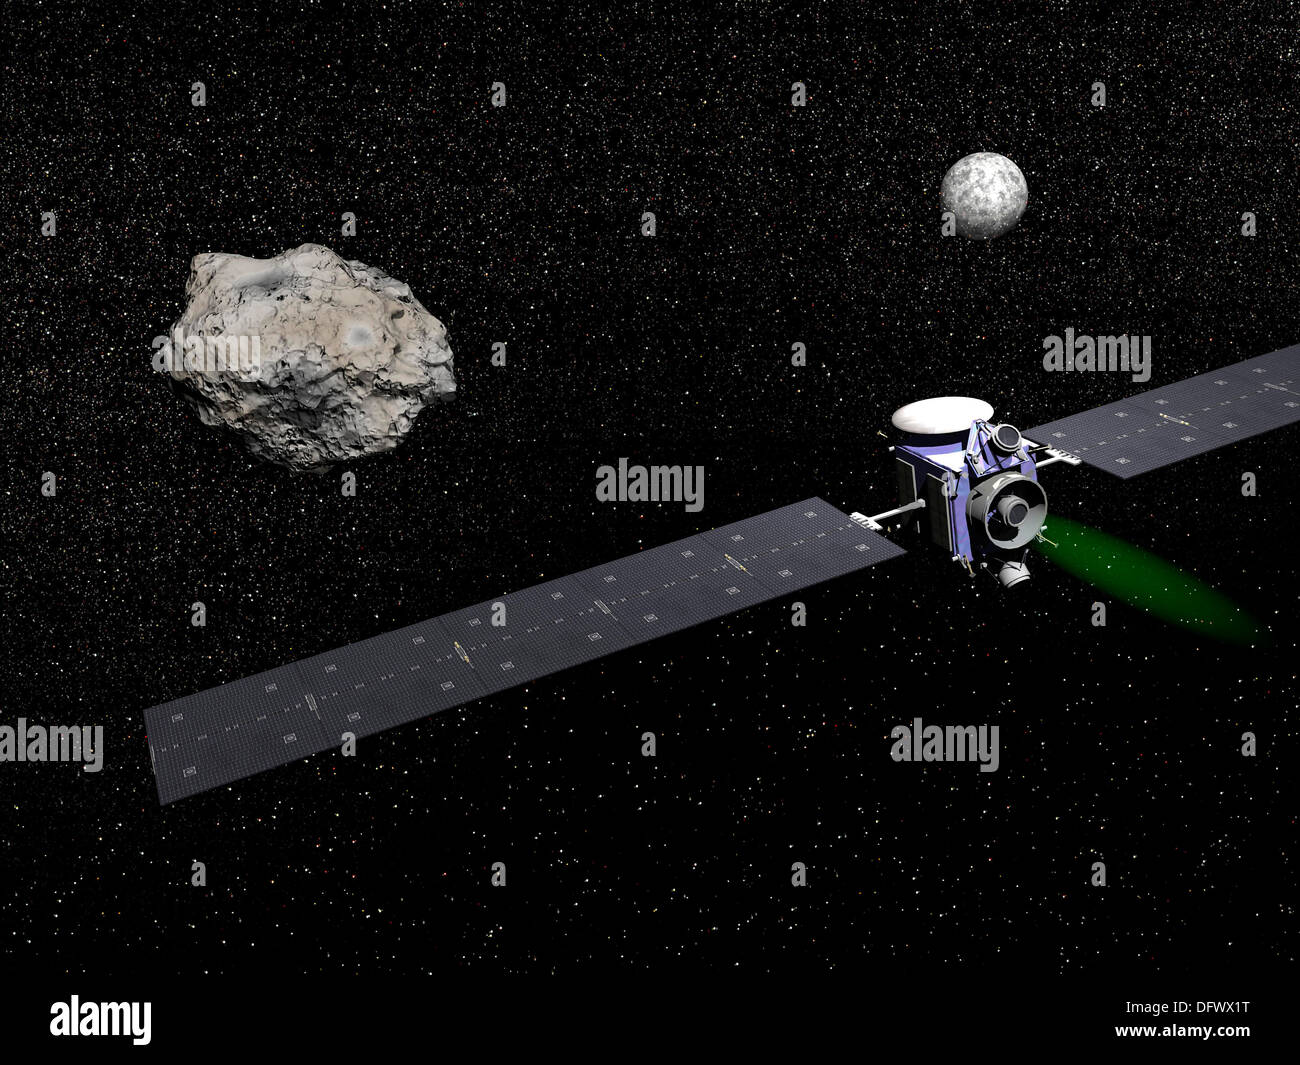 Dawn robotic spacecraft orbiting Ceres and Vesta, members of the asteroid belt, to study them in space. Stock Photo